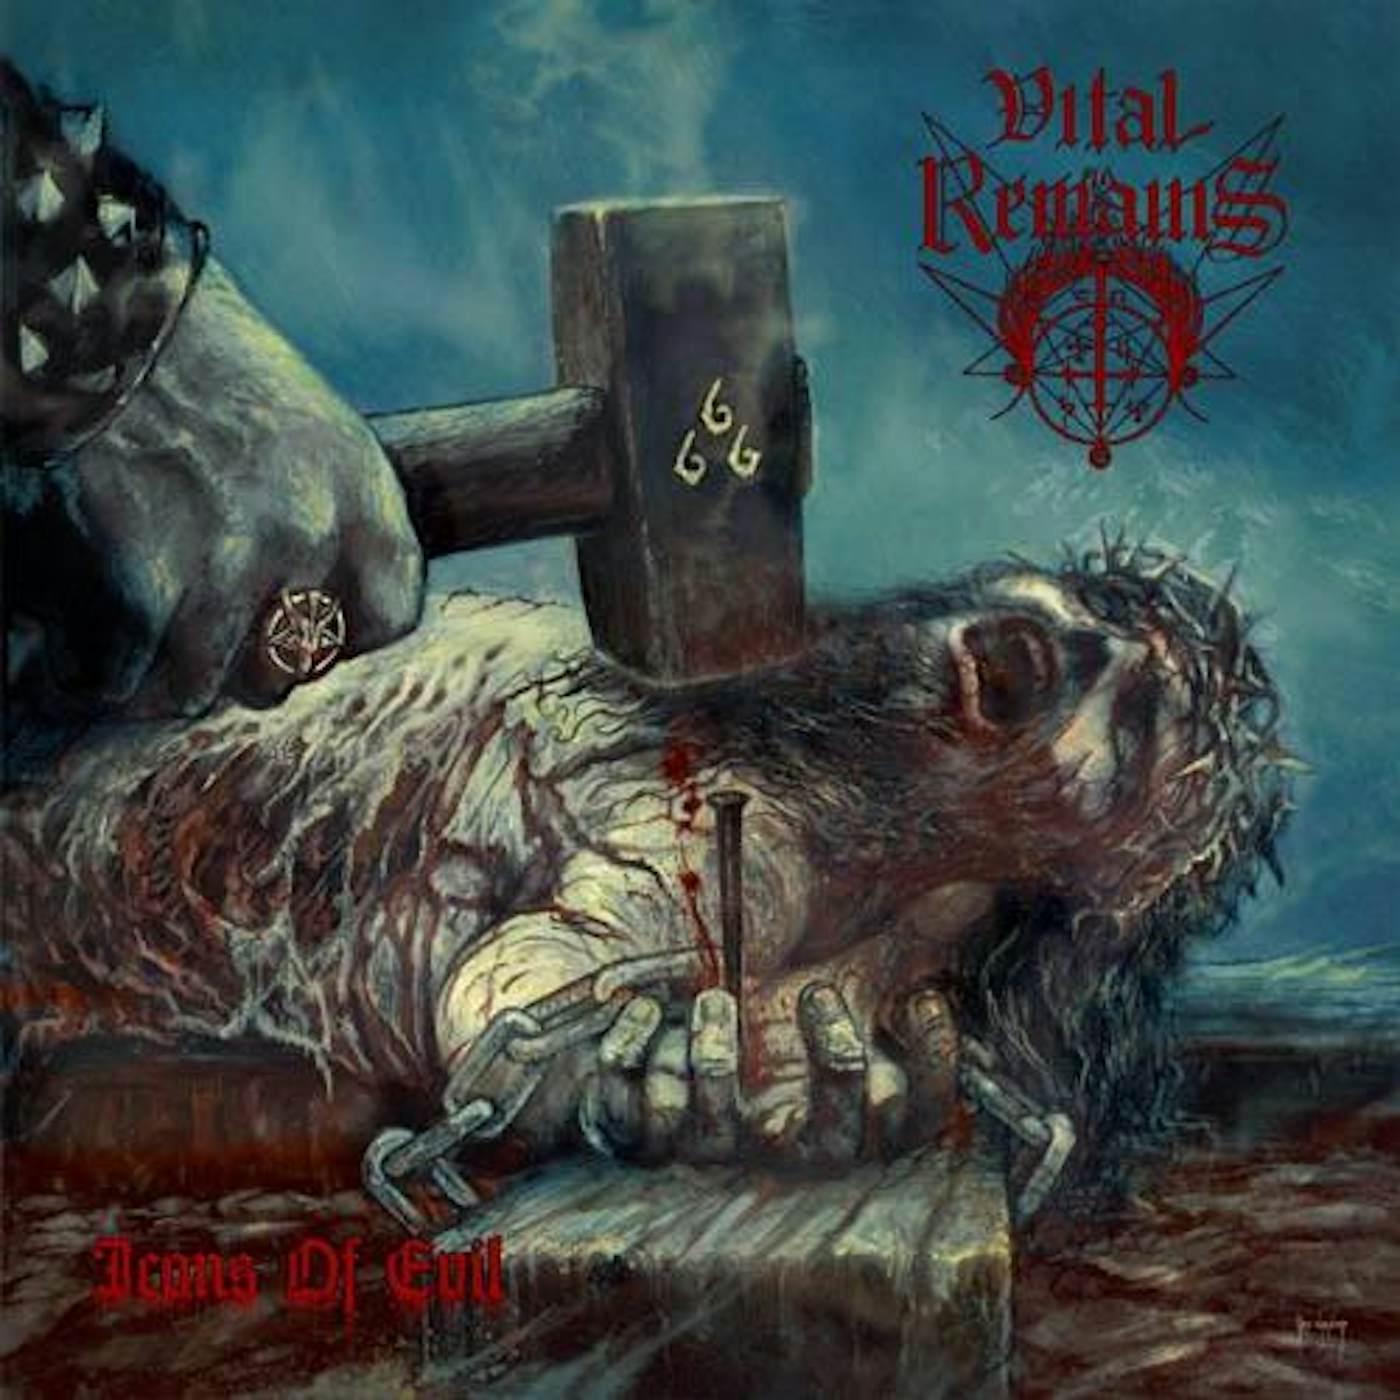 Vital Remains ICONS OF EVIL CD